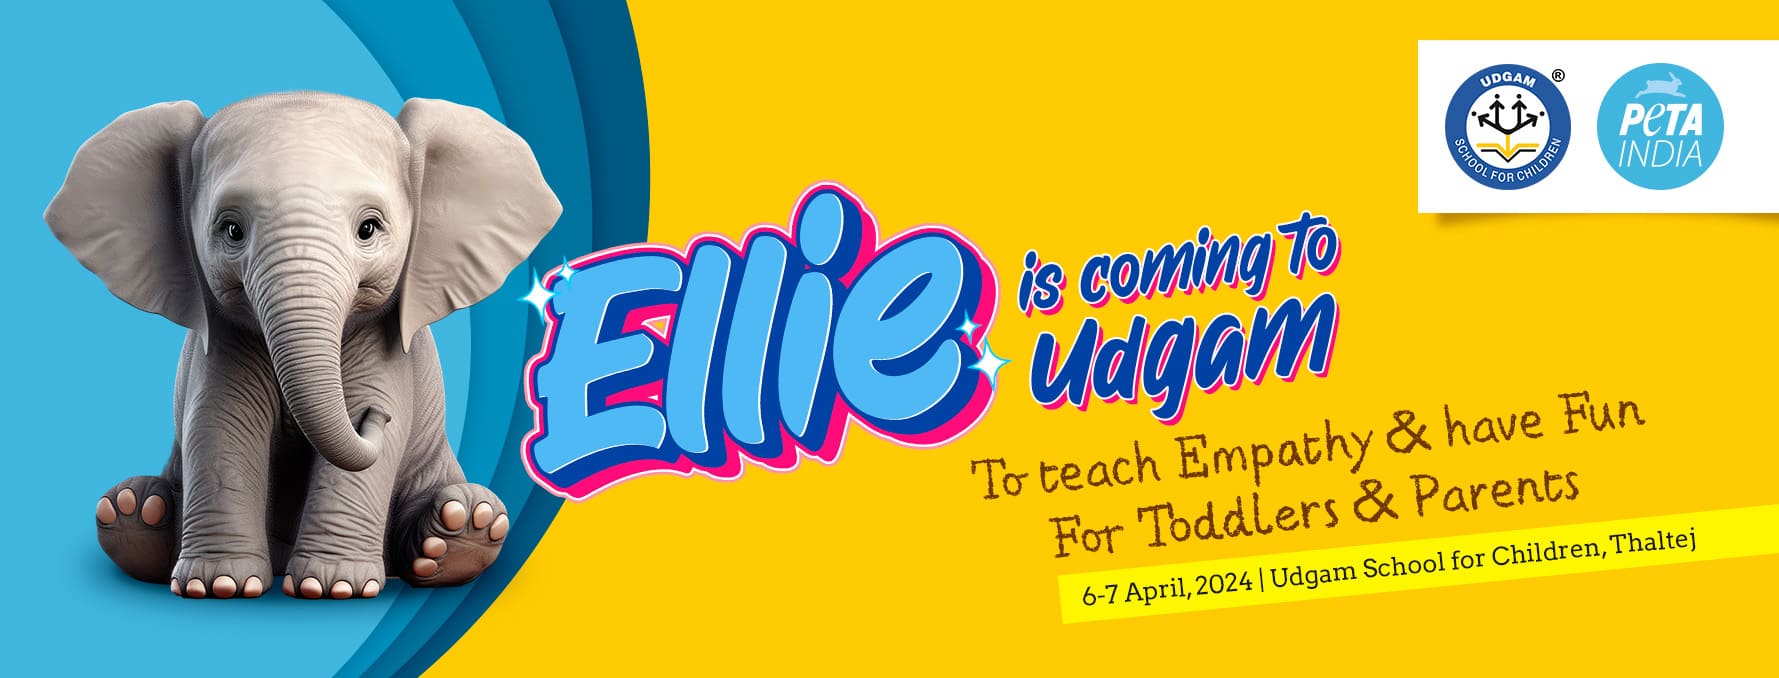 ellie-is-coming-to-udgam